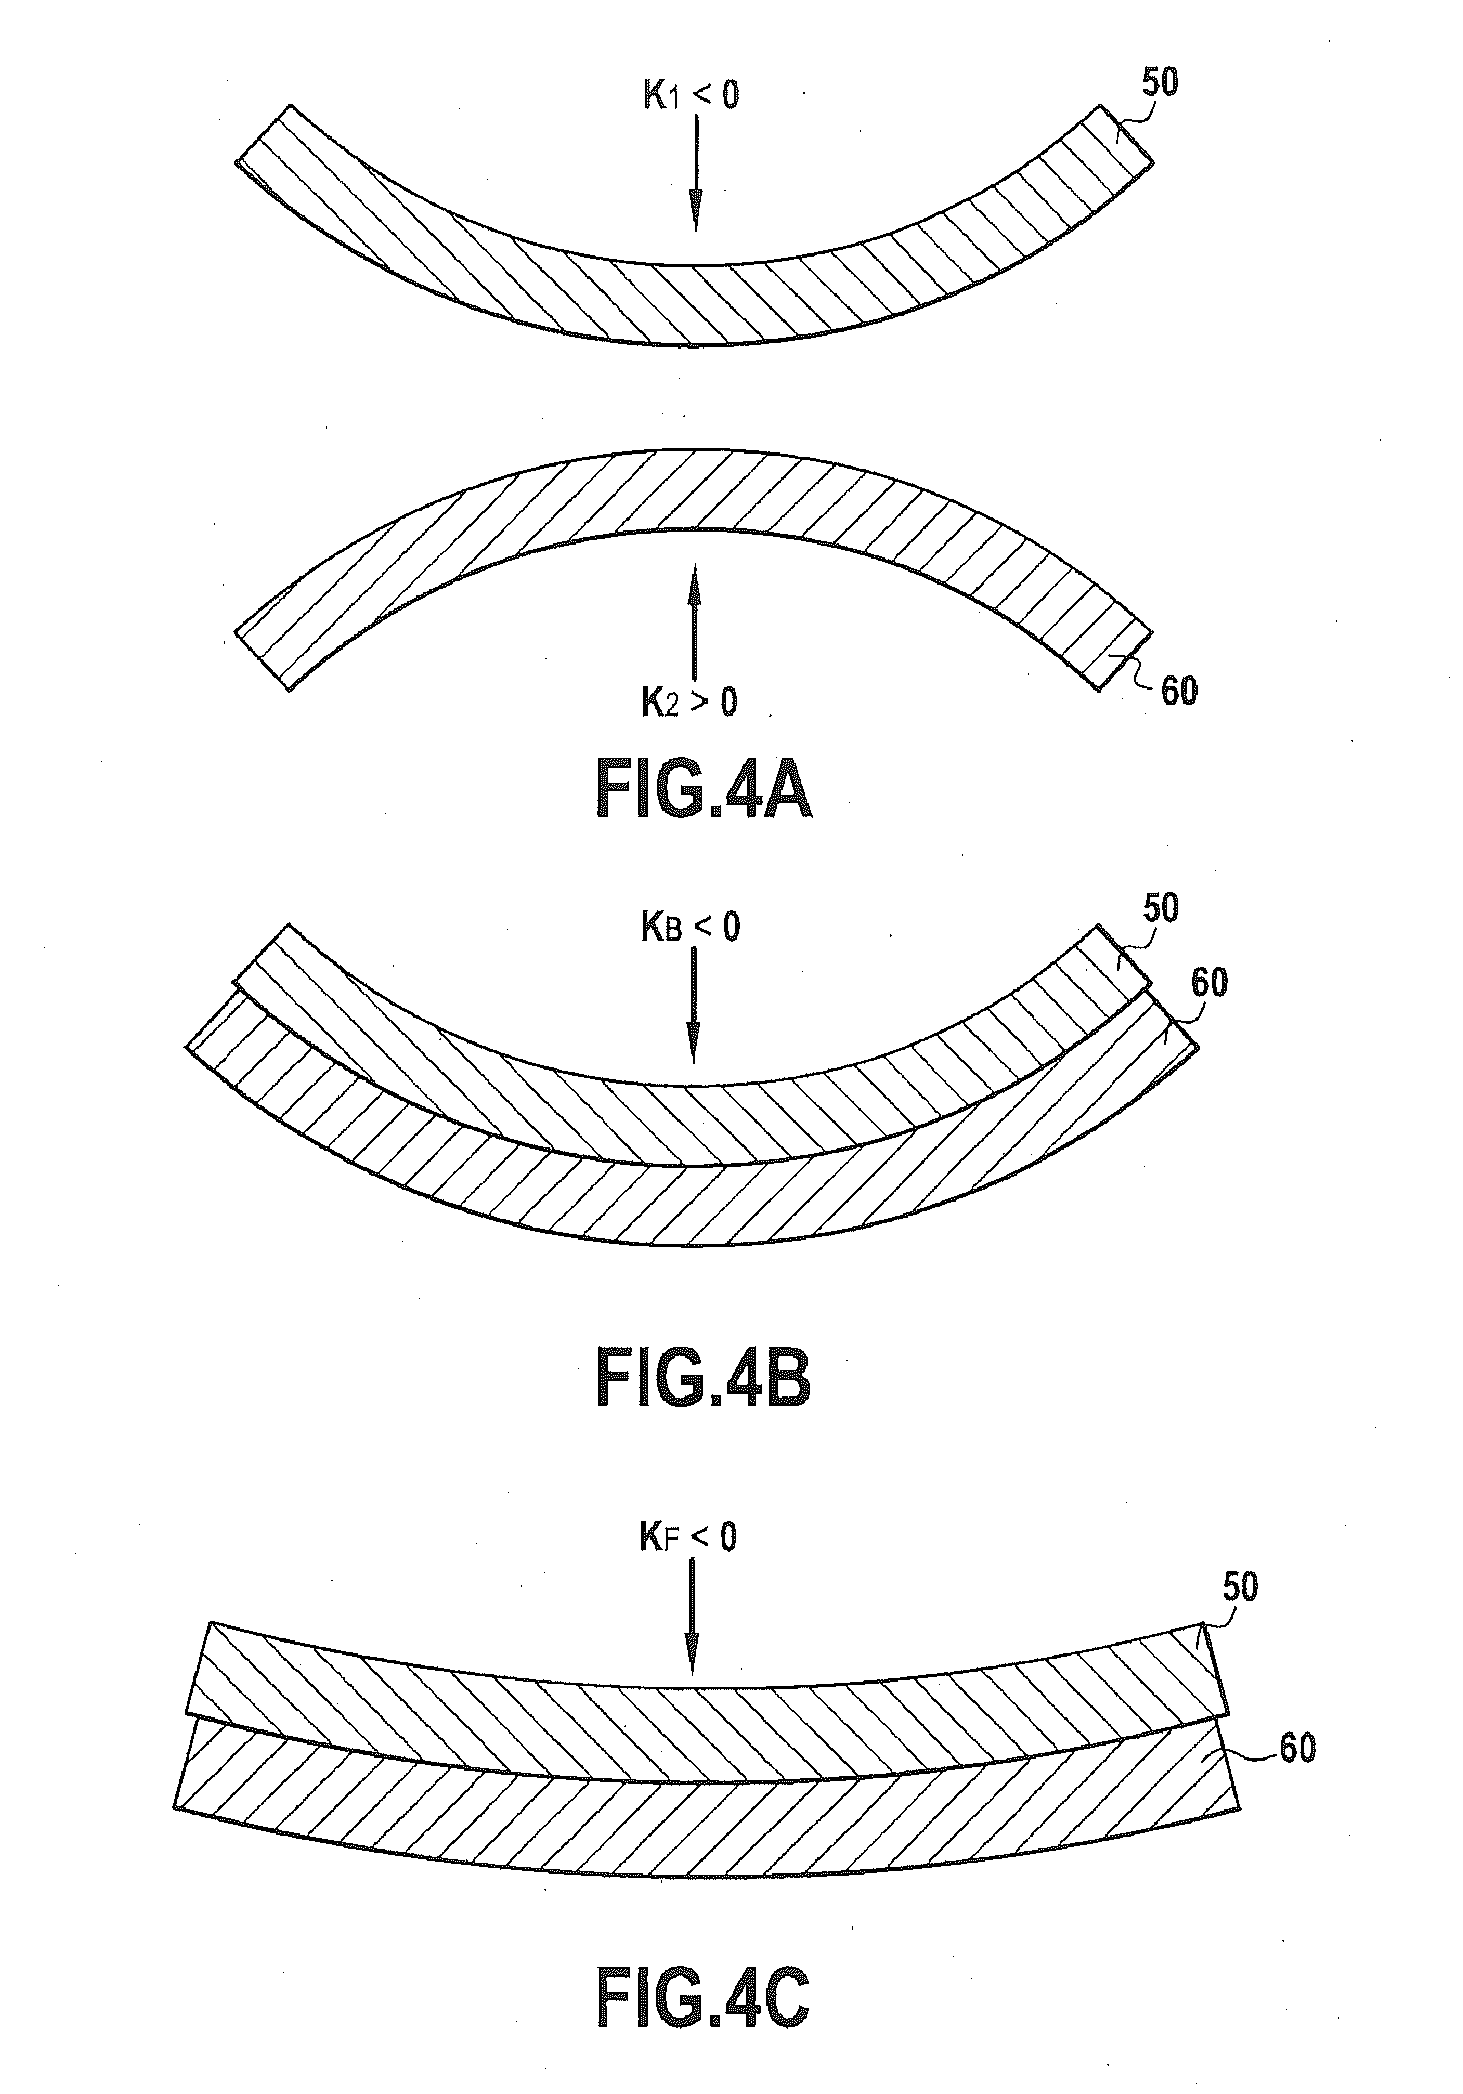 Direct bonding method with reduction in overlay misalignment